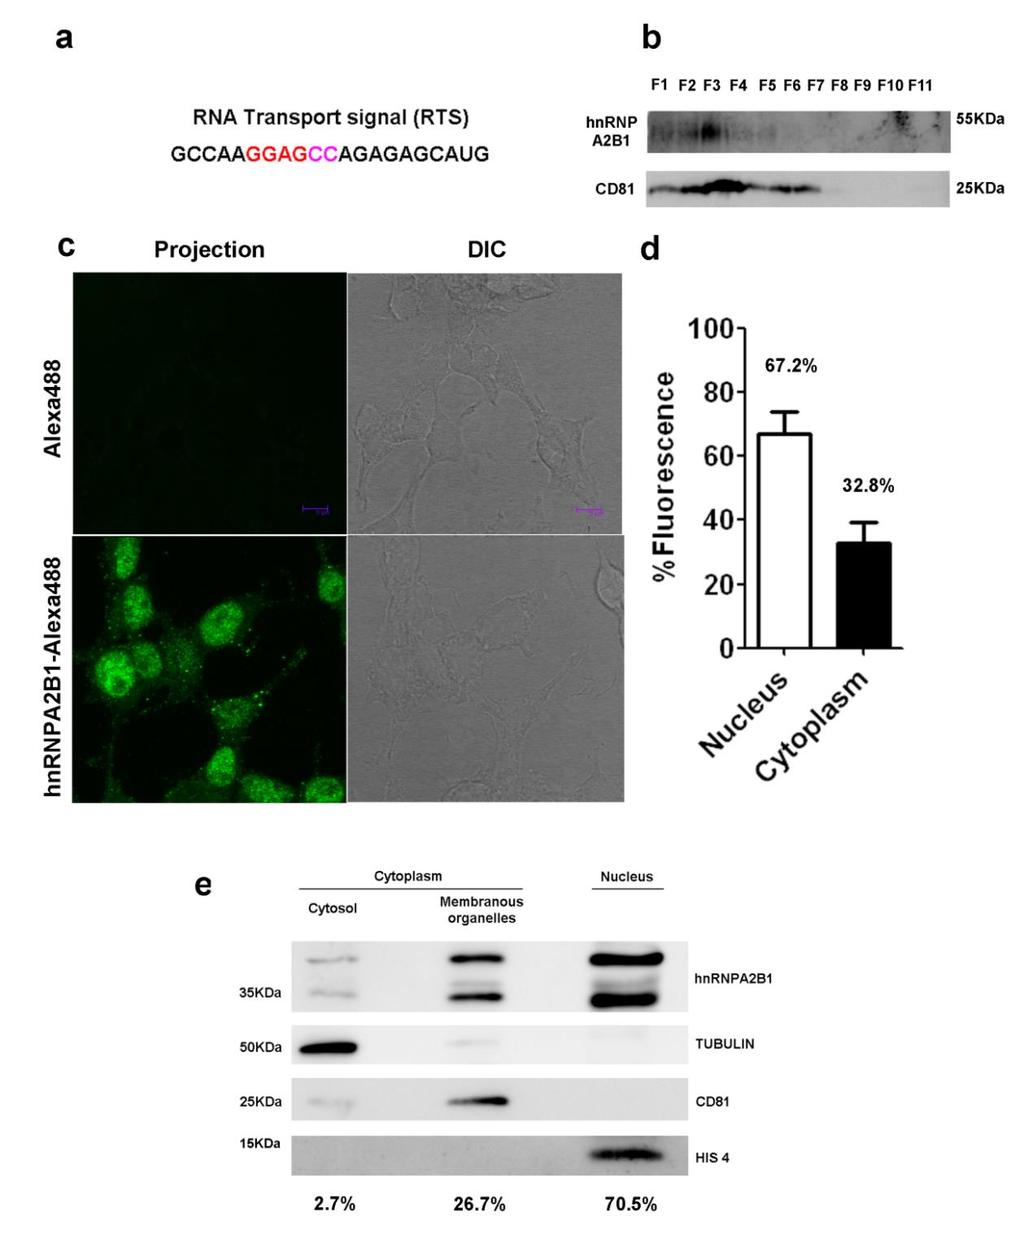 Supplementary Figure S4. HnRNPA2B1 presence in exosomes (a) RNA transport signal sequence (RTS) (b) Western blot showing hnrnpa2b1 and CD81 enrichment in sucrose fraction 3.